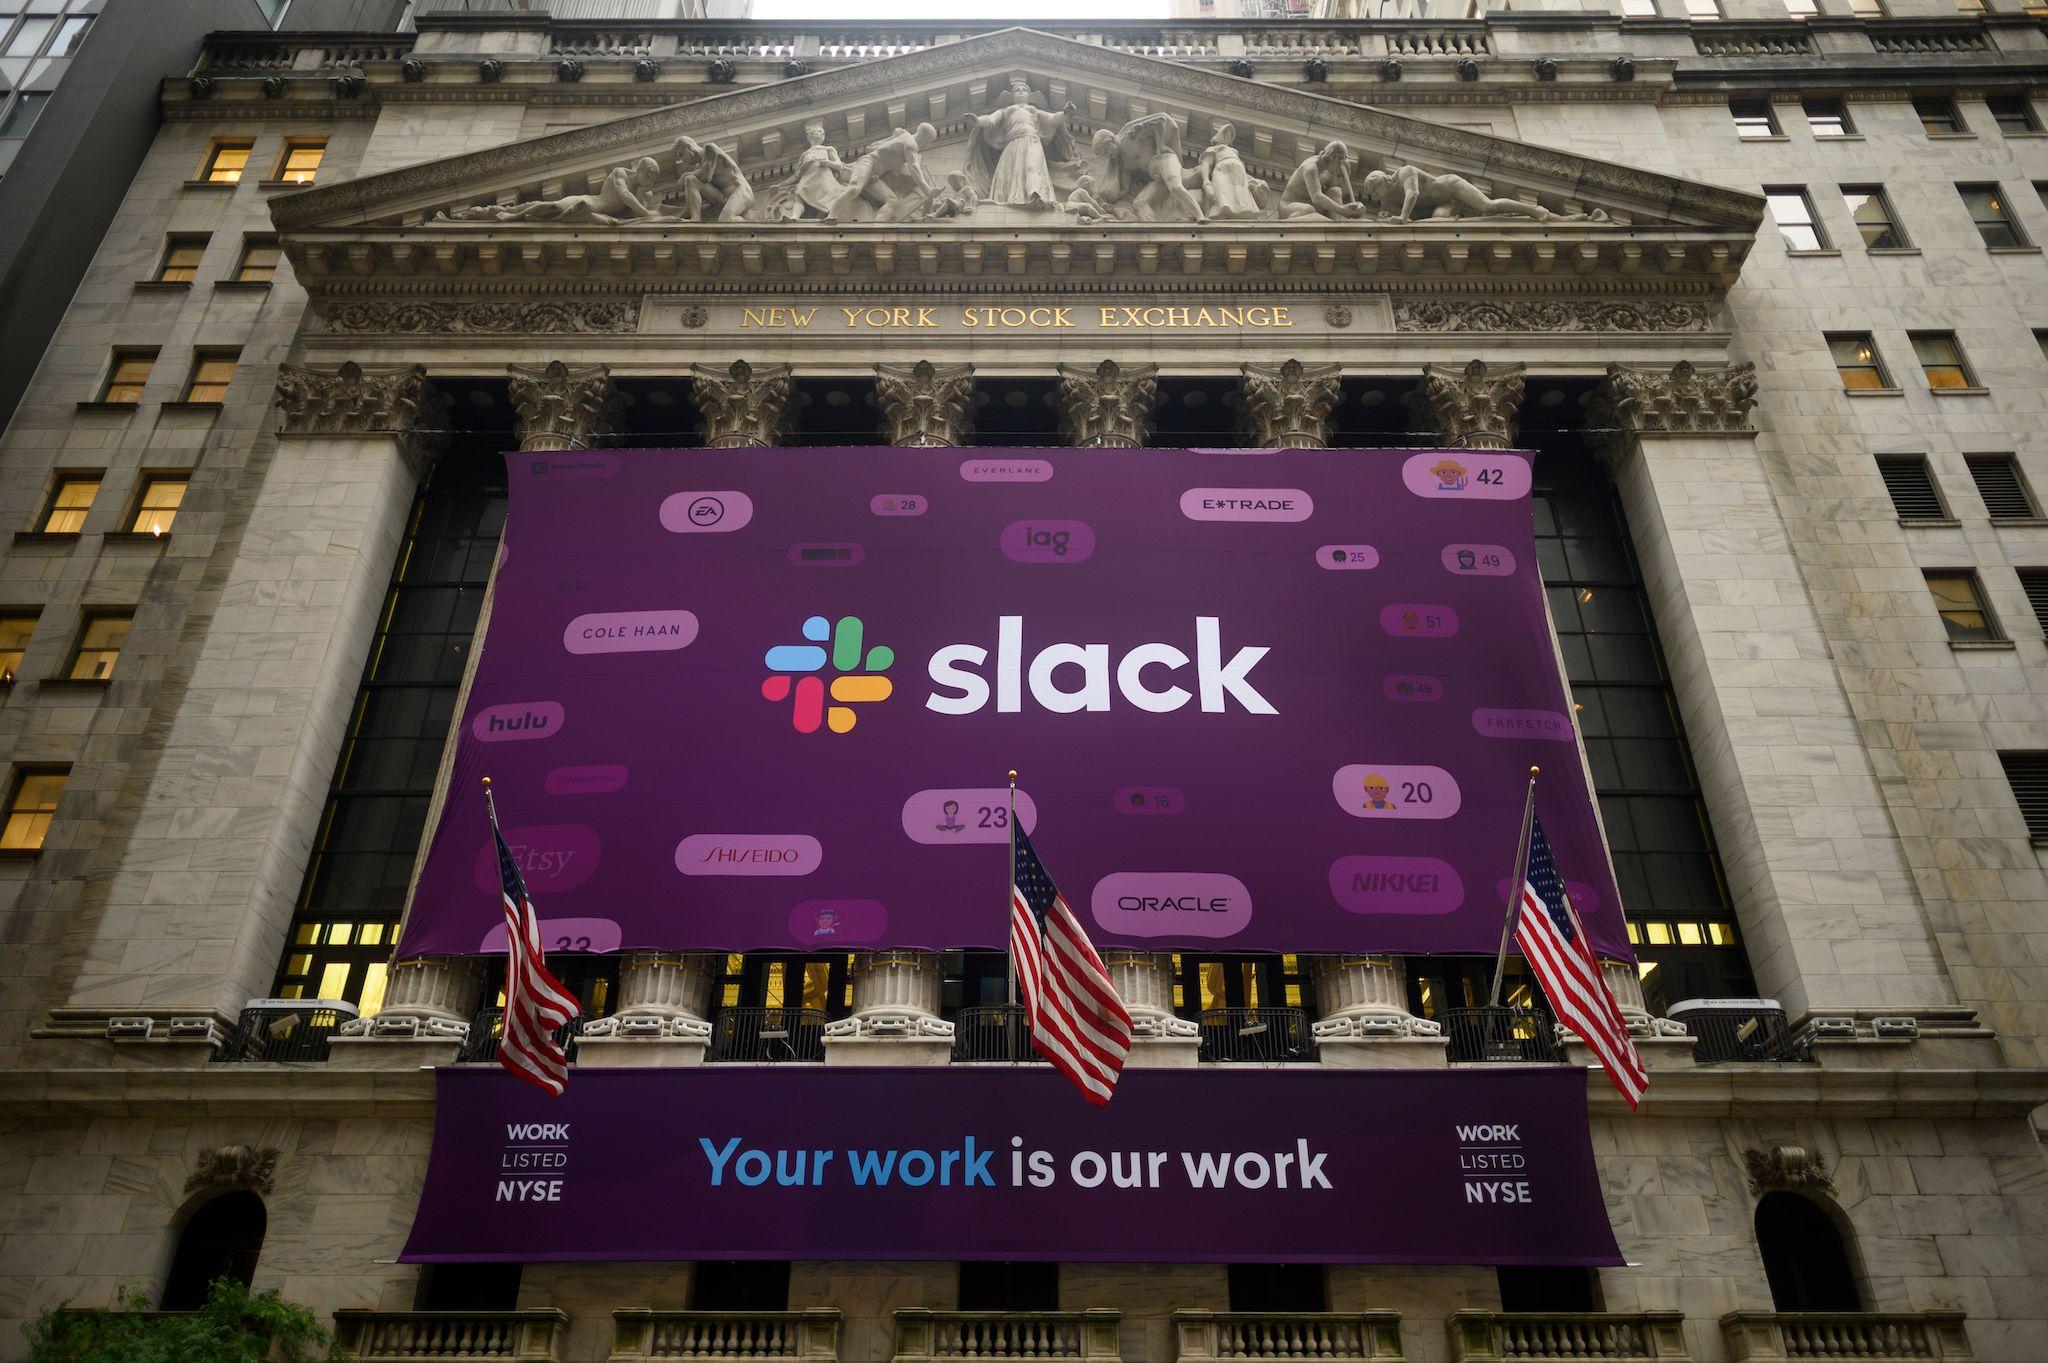 The logo of the Slack Technologies Inc. is seen outside the New York Stock Exchange (NYSE) after their company public offering (IPO) on June 20, 2019 located at Wall Street in New York City